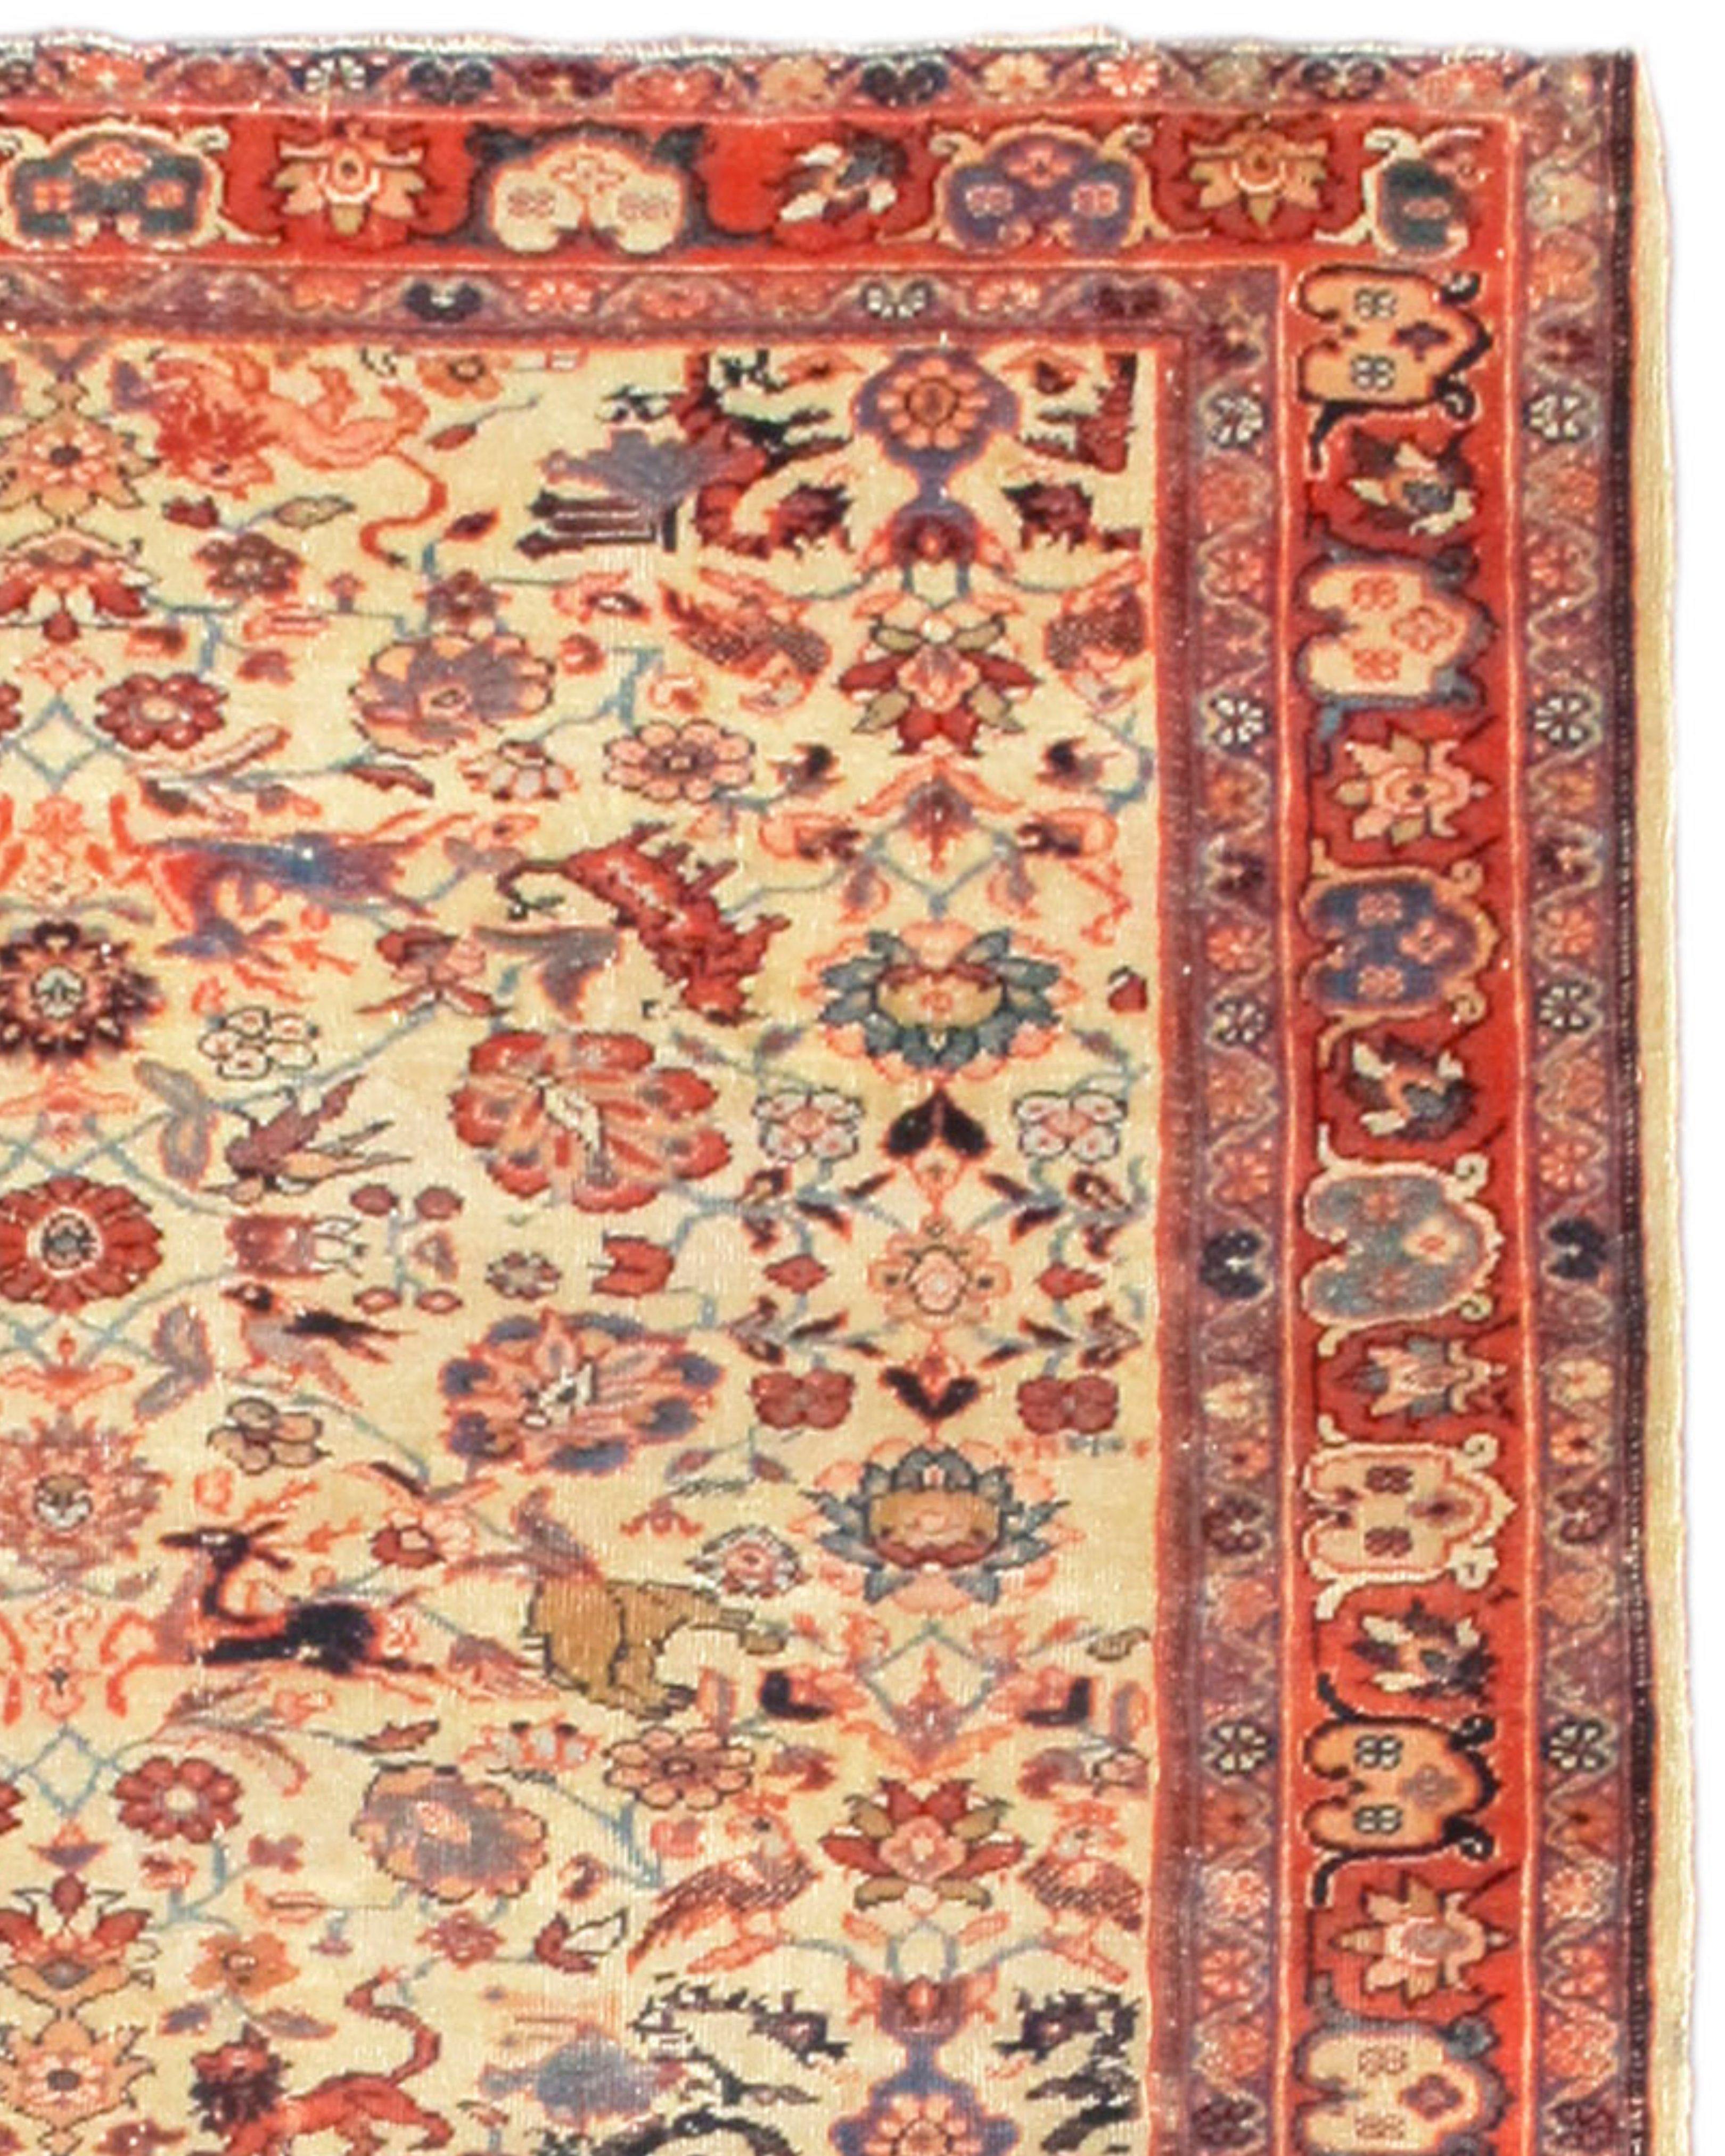 Ziegler Mahal Rug, c. 1900

Additional Information:
Dimensions: 4'7